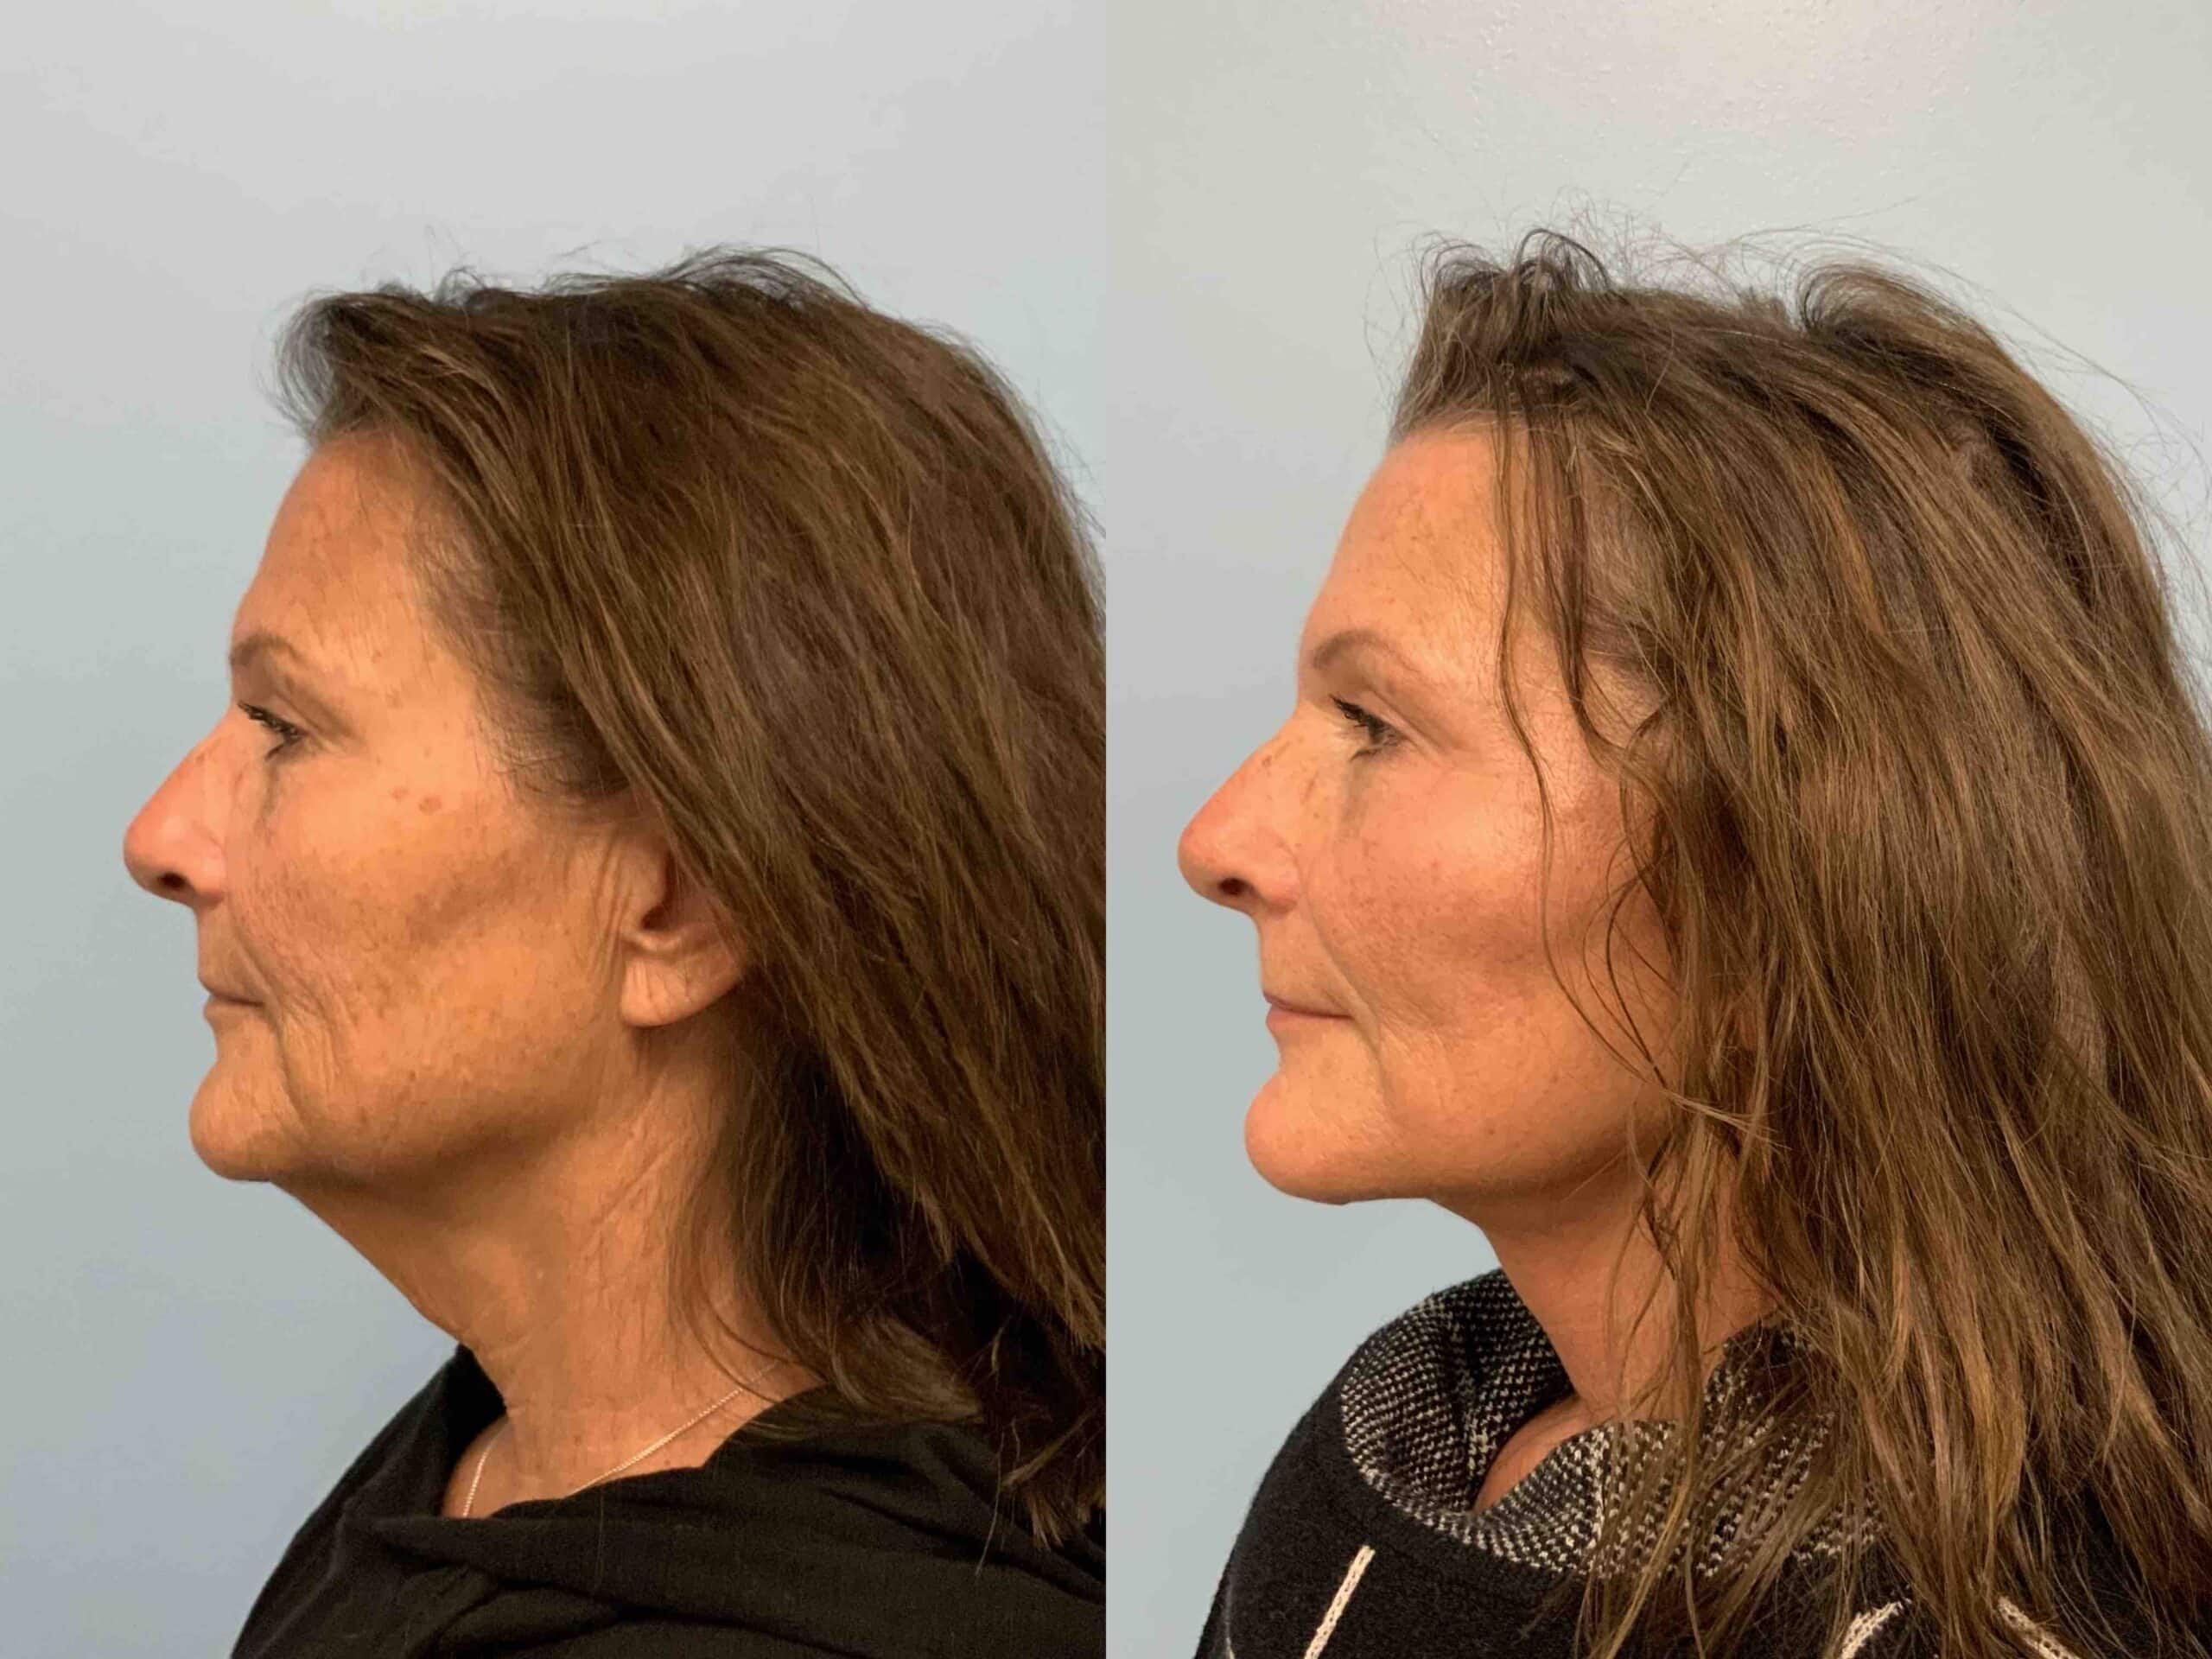 Before and after, patient 3 weeks post op from Facelift and Neck lift procedures performed by Dr. Paul Vanek